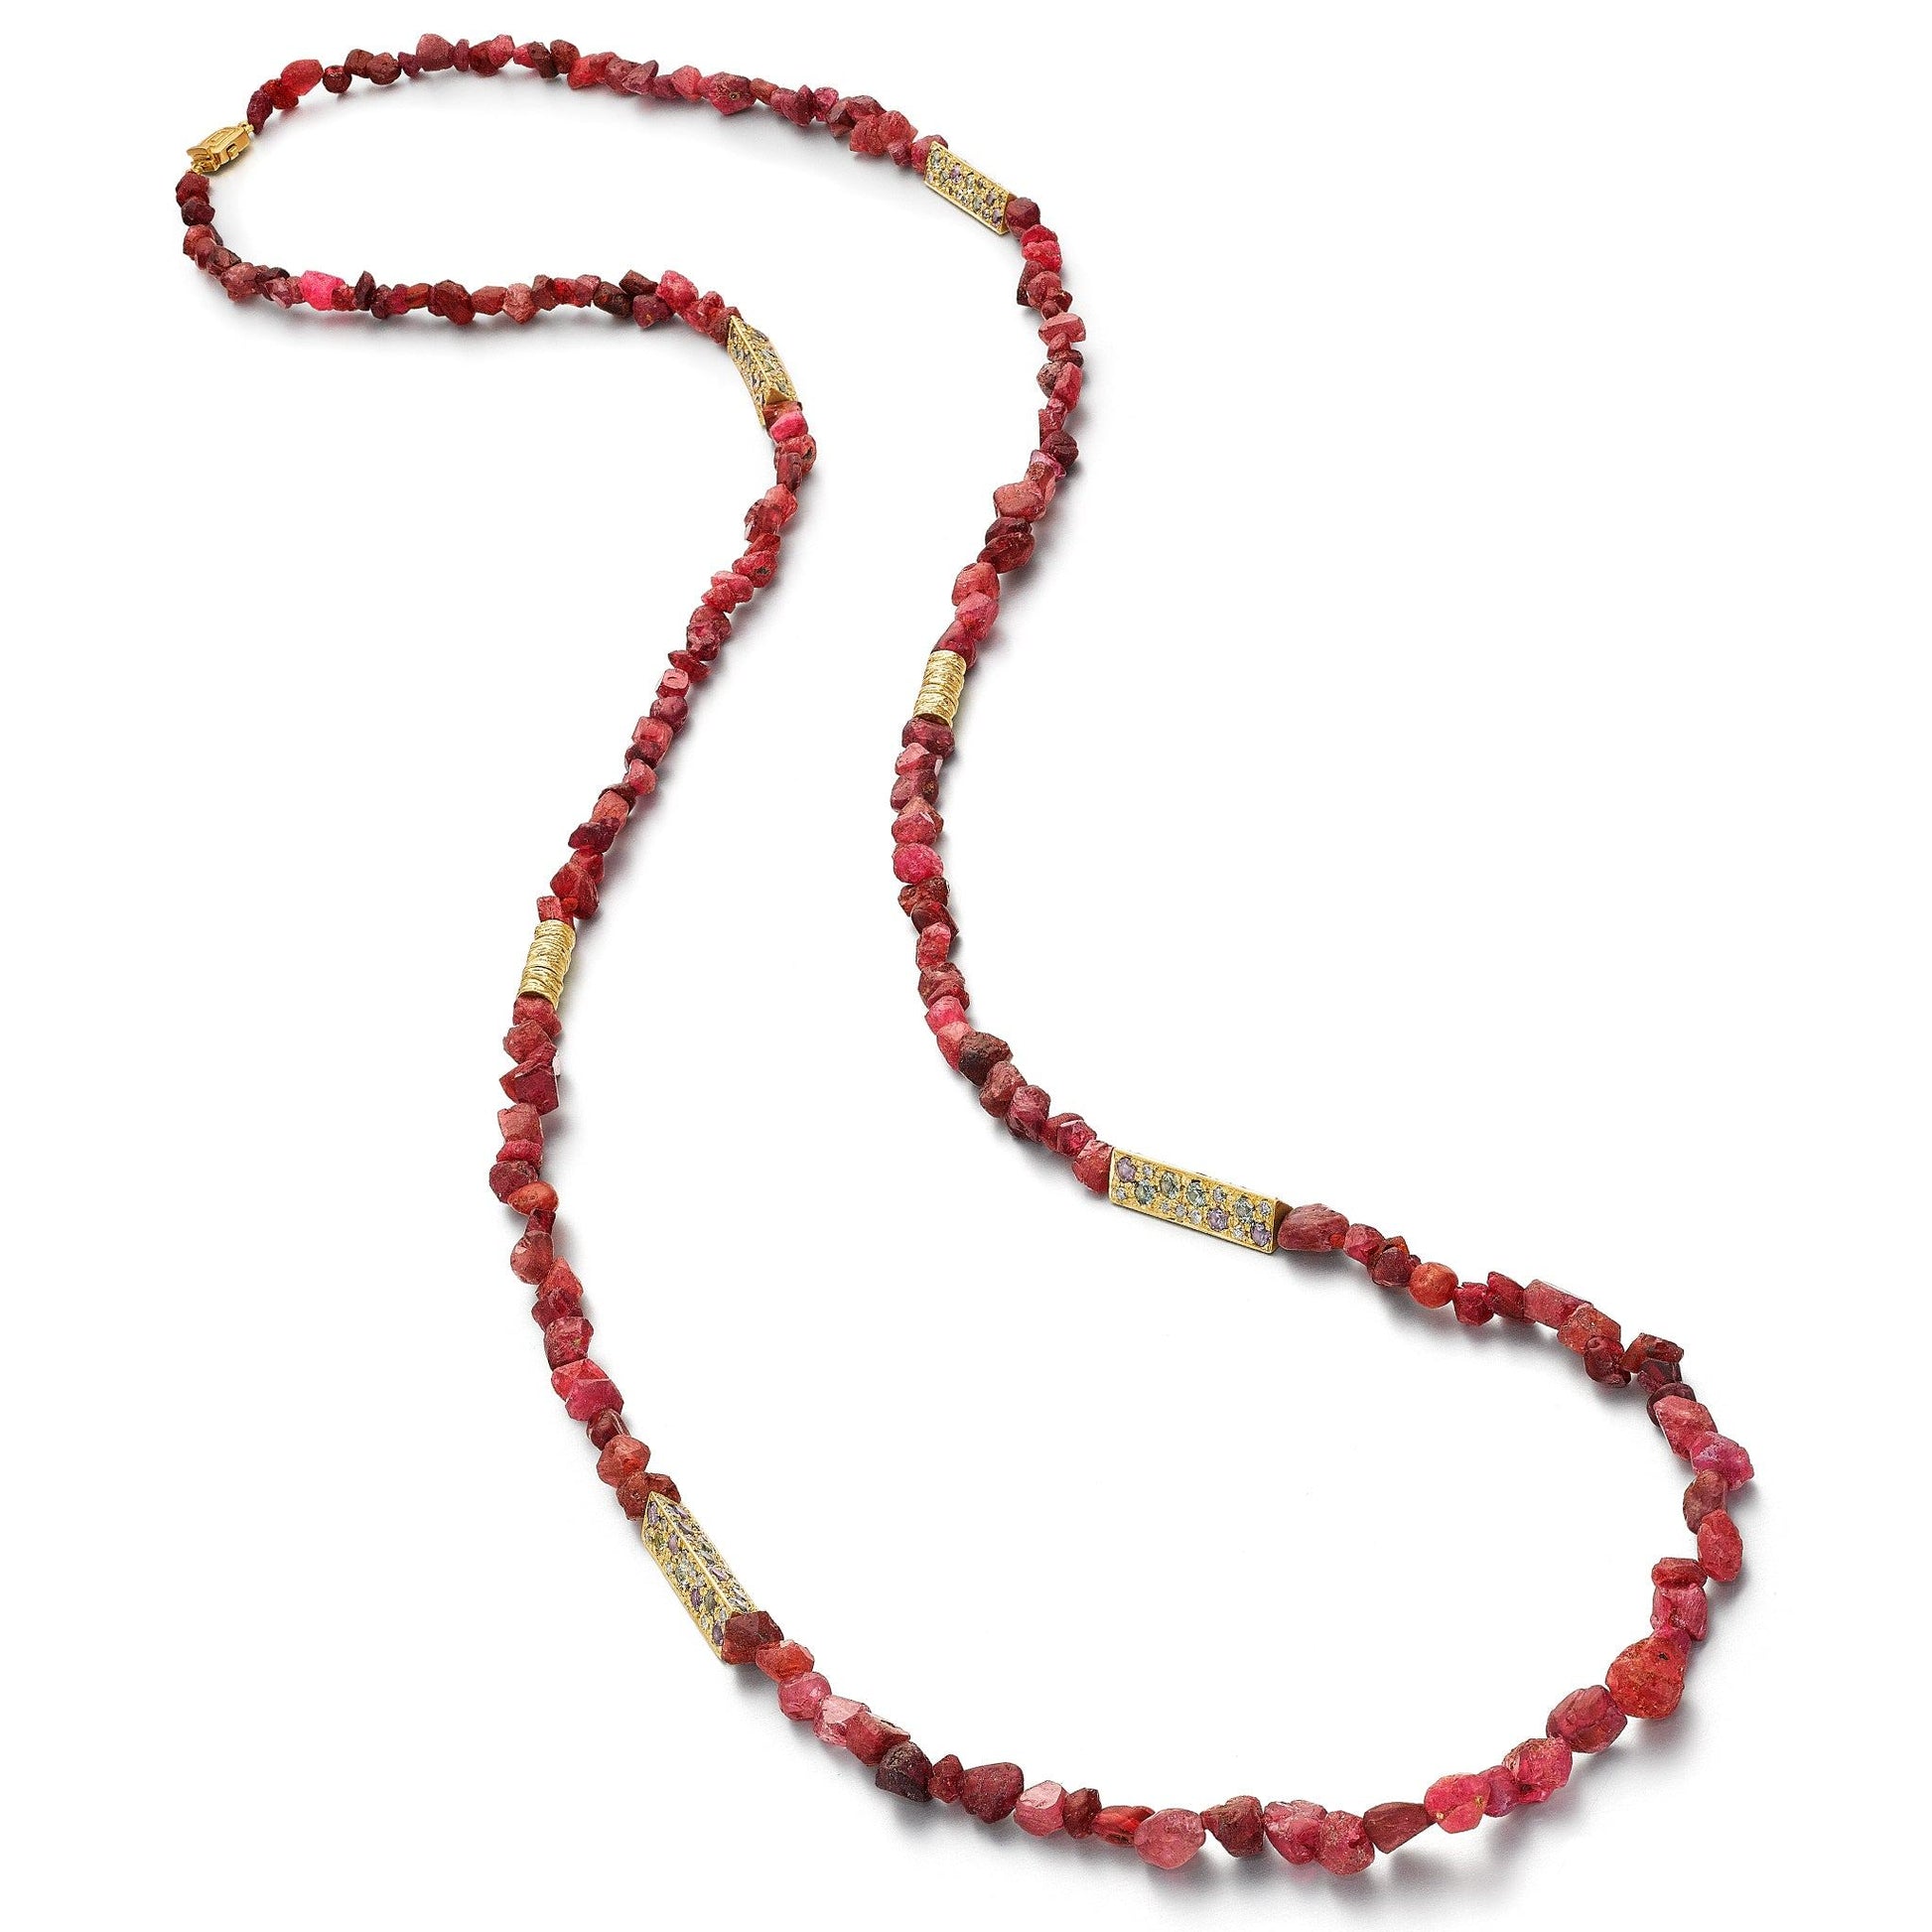 Mimi So Wonderland African Red Spinel Bead Necklace_18k Yellow Gold